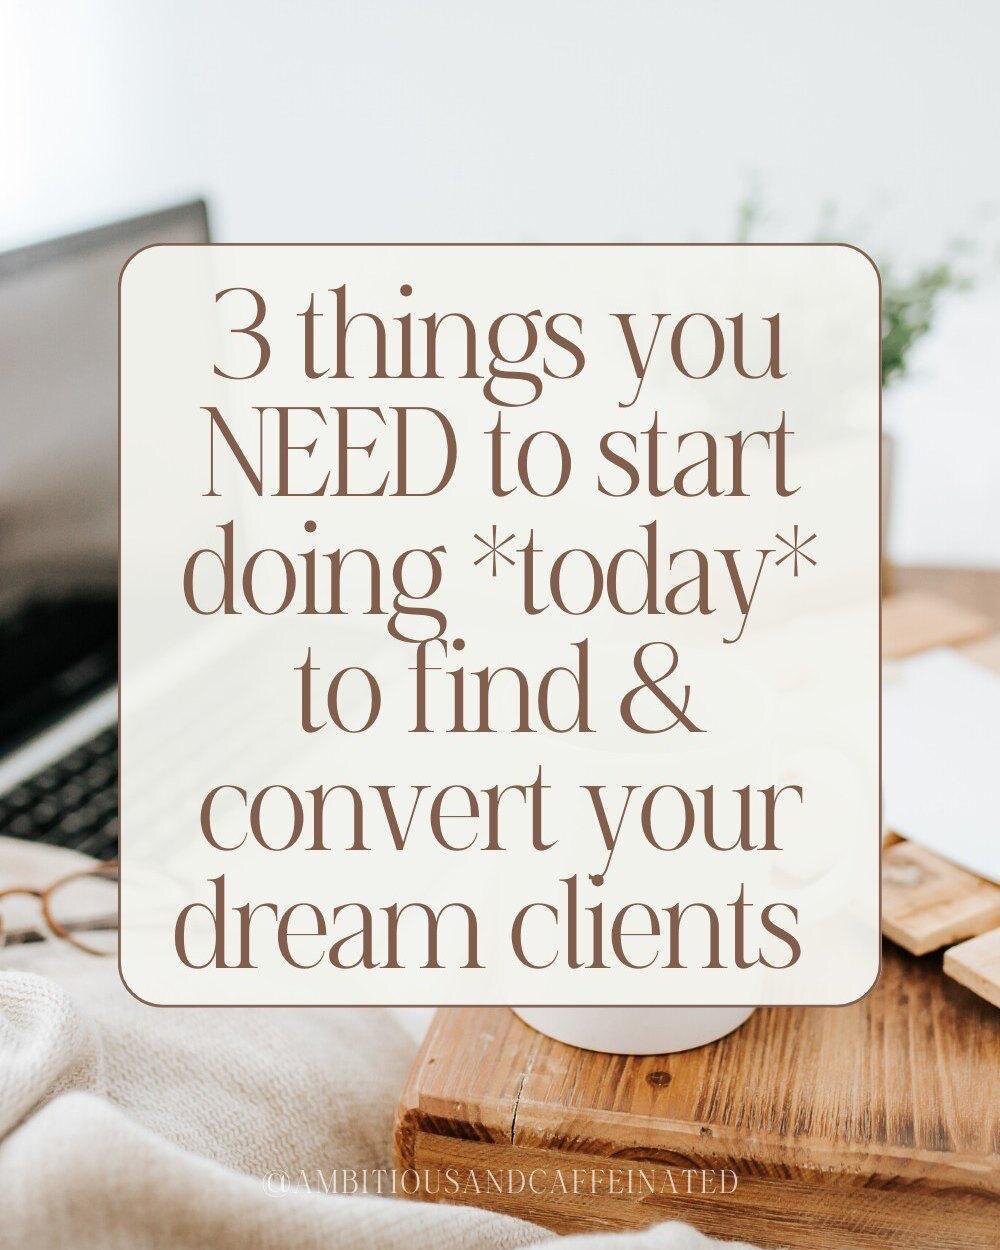 👇🏽 3 things you NEED to start doing *today* to find + convert your dream clients 👇🏽

{this method allows me to support my plant addiction LOL🪴}

1️⃣ Reflect &amp; think of your top 3 fav clients 🙌🏼 

What are common features between the 3? How